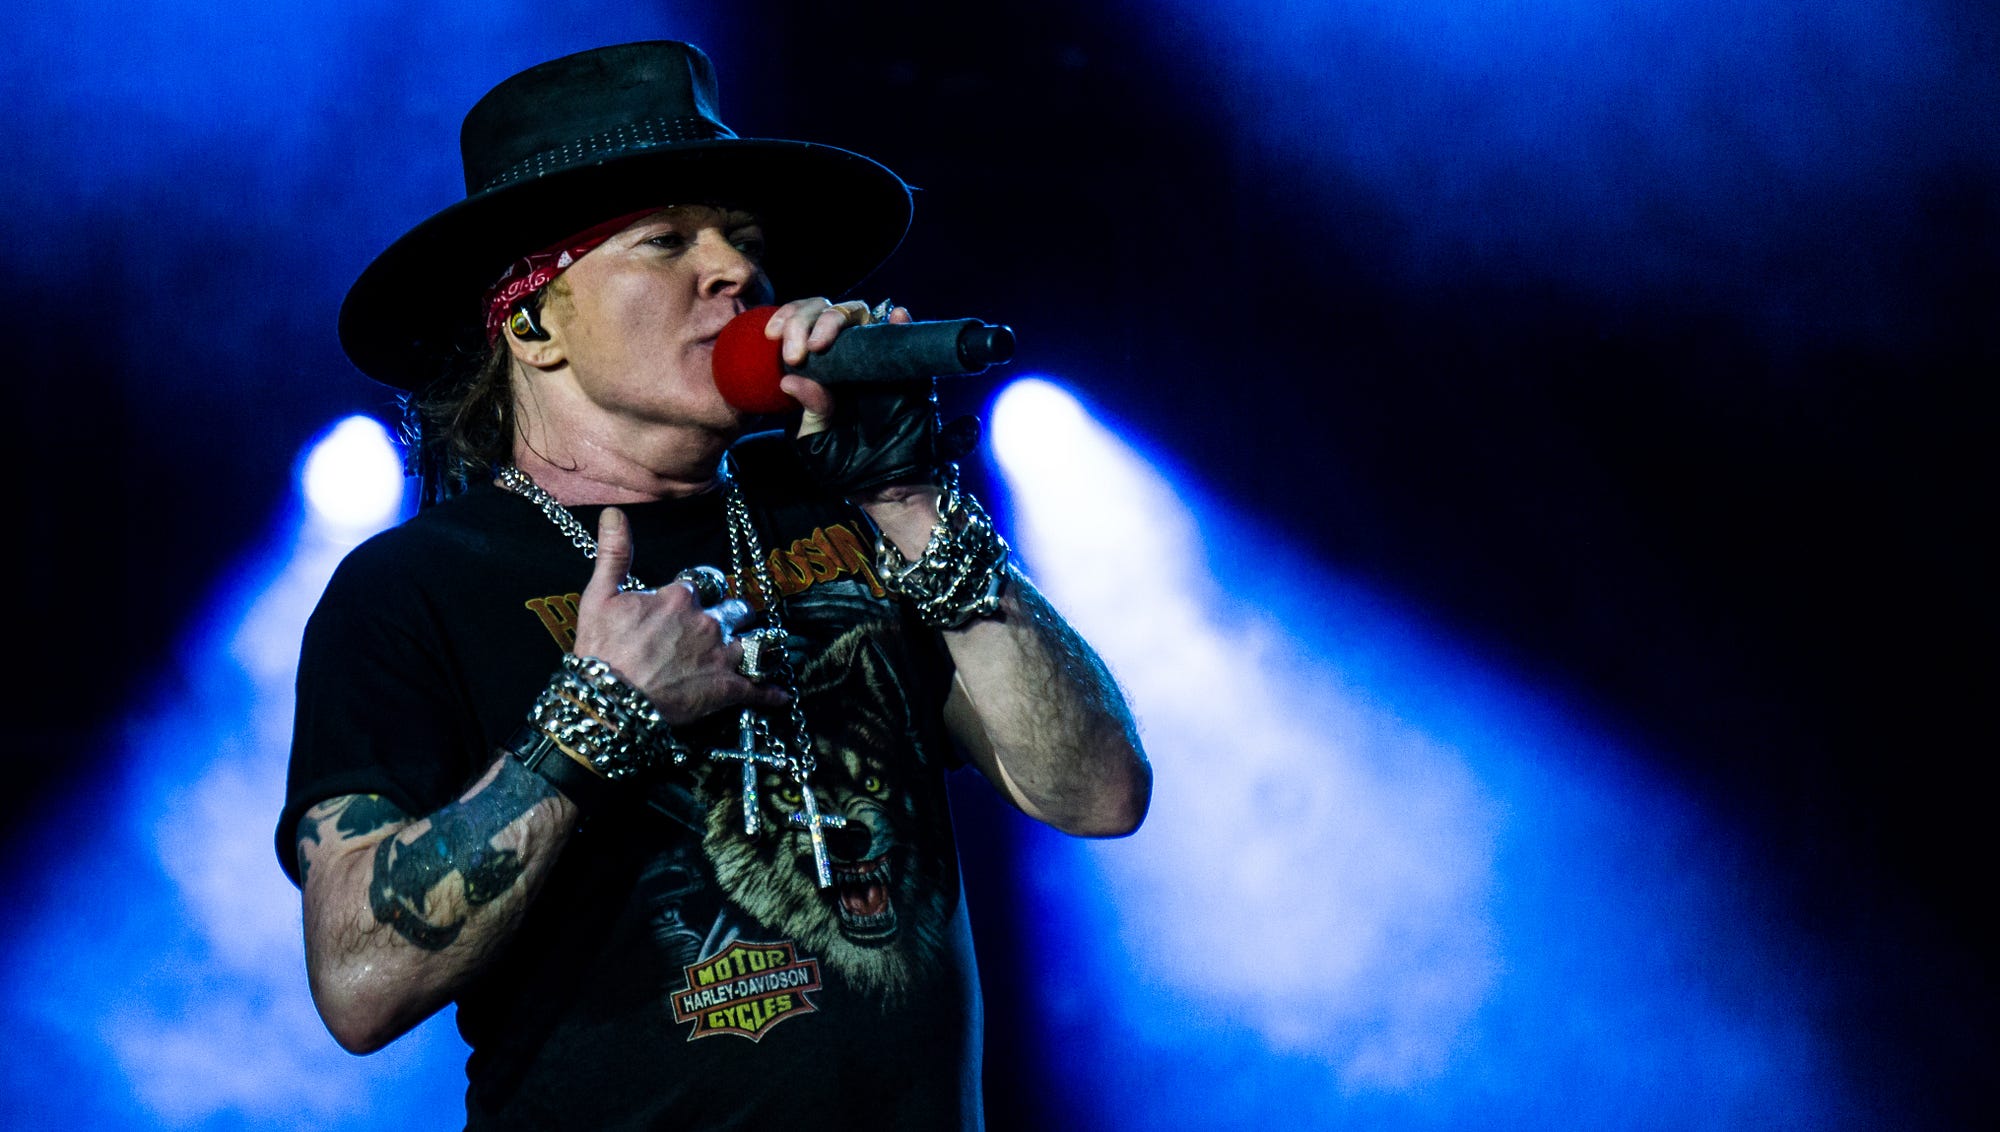 Axl Rose Has Message for Fans Following End of Guns N' Roses Tour